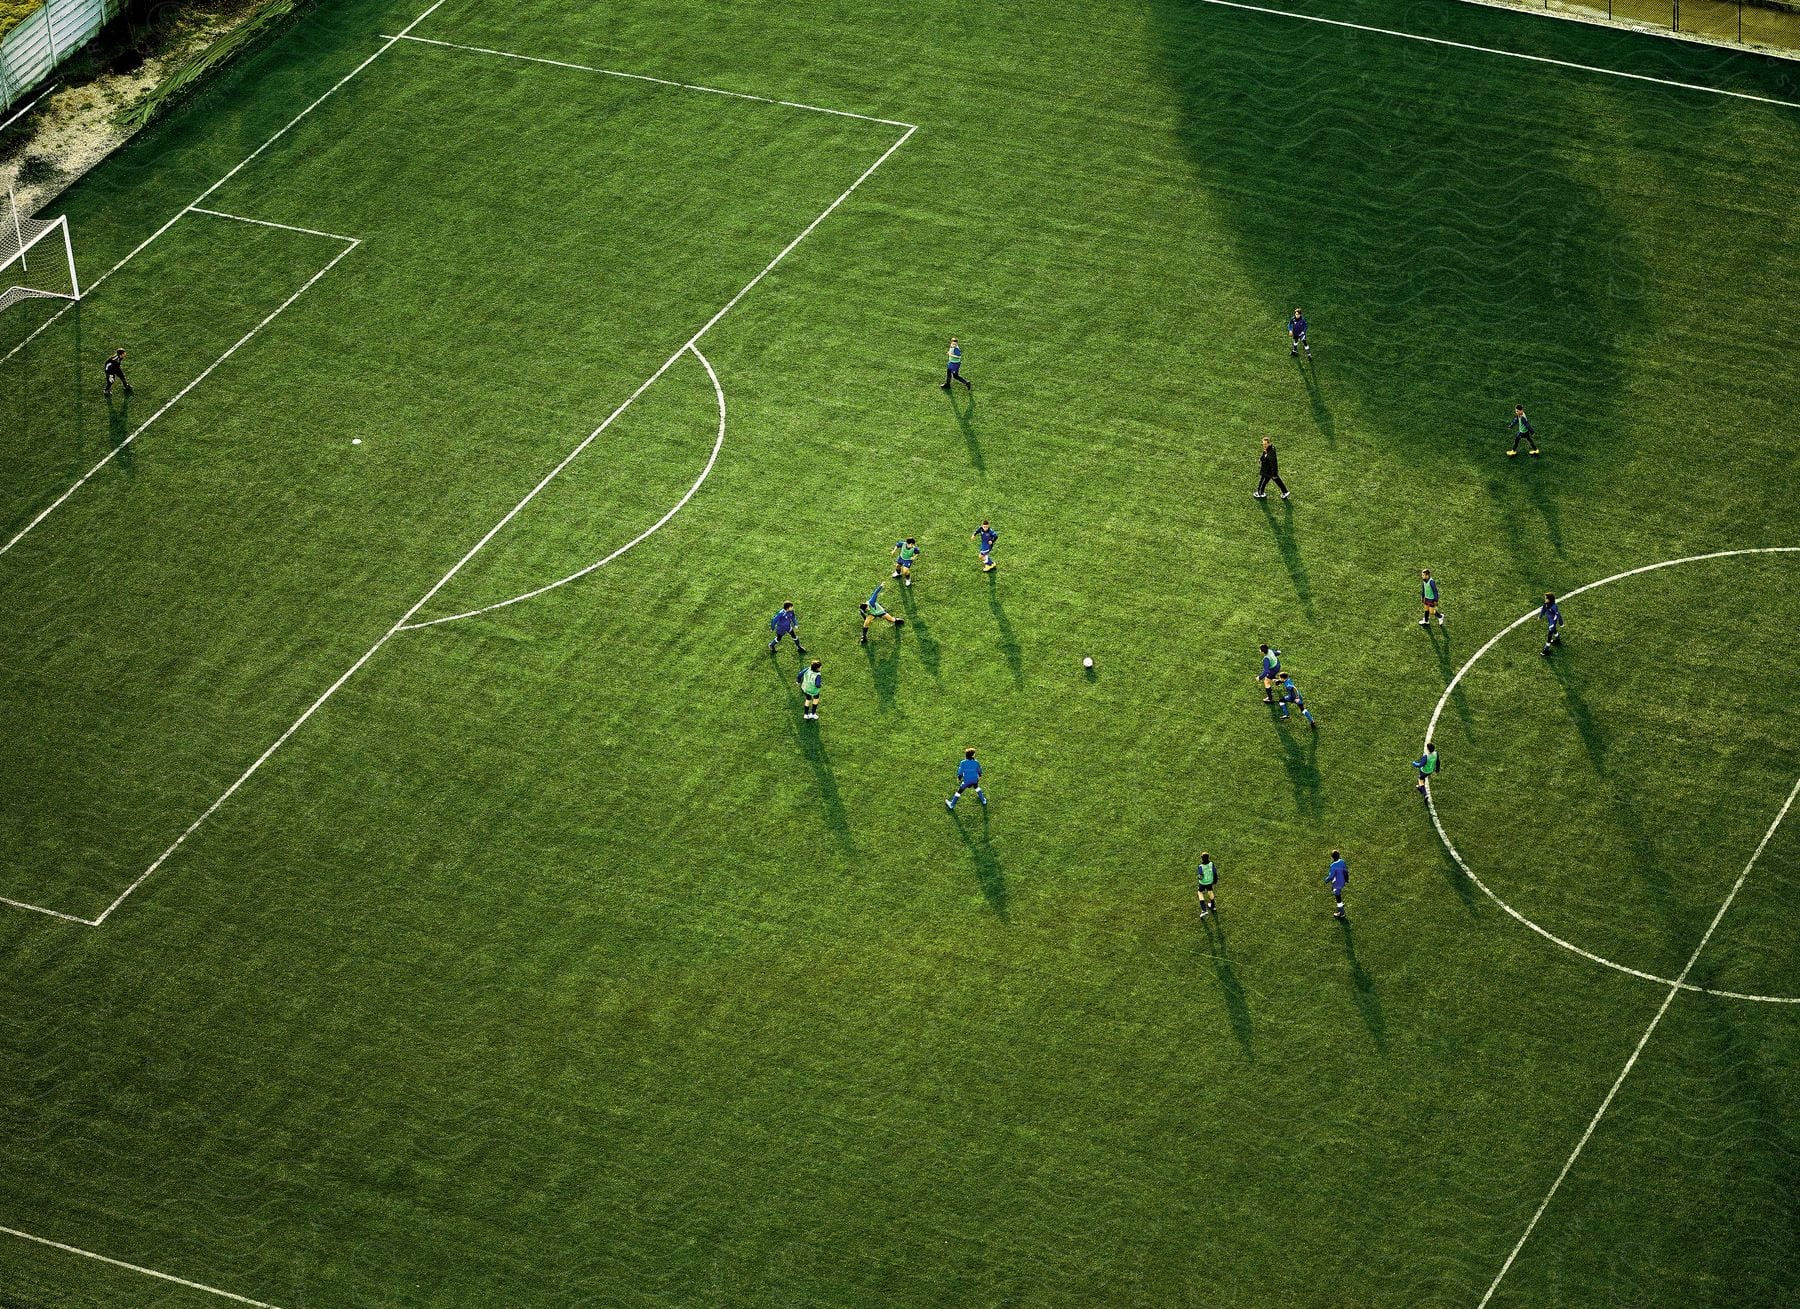 Aerial view of a soccer game being played on a soccer field outdoors